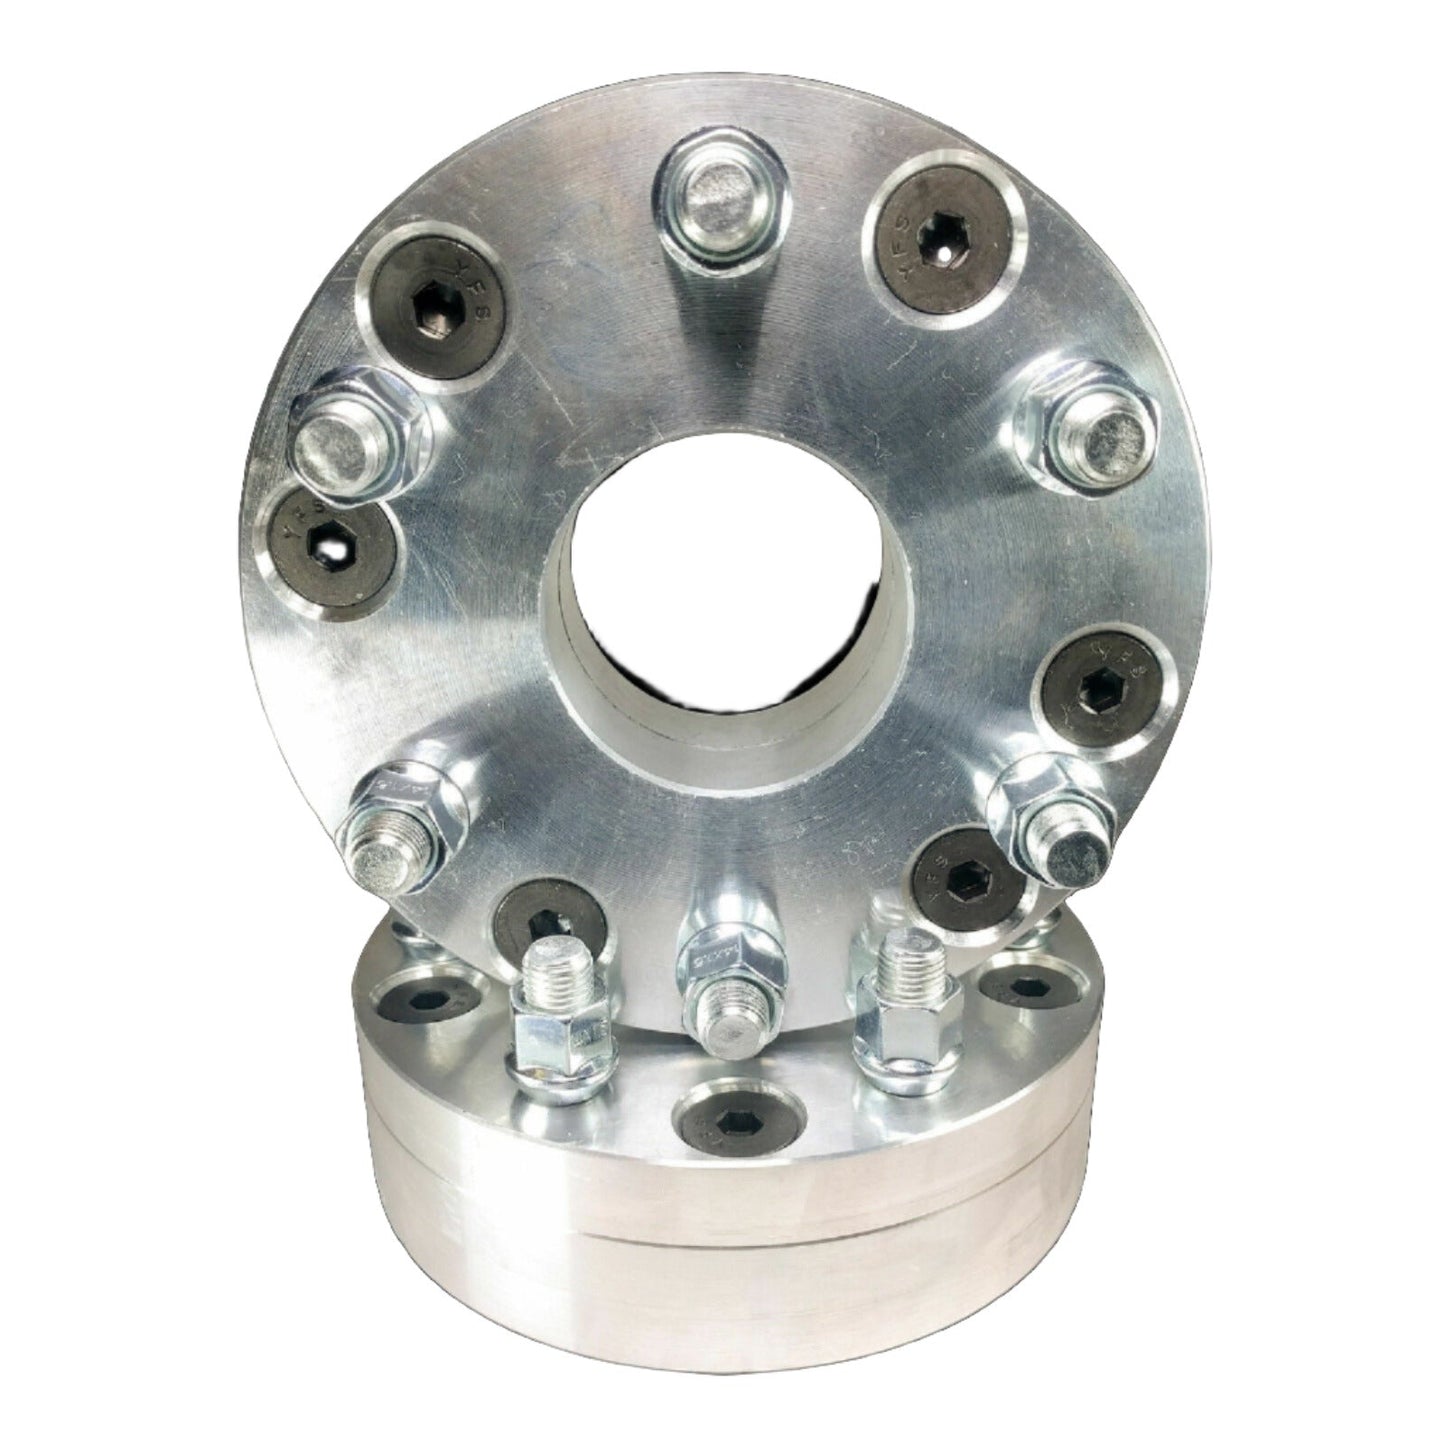 4x130 to 6x135 2 piece Wheel Adapter - Thickness: 1.75" - 3"